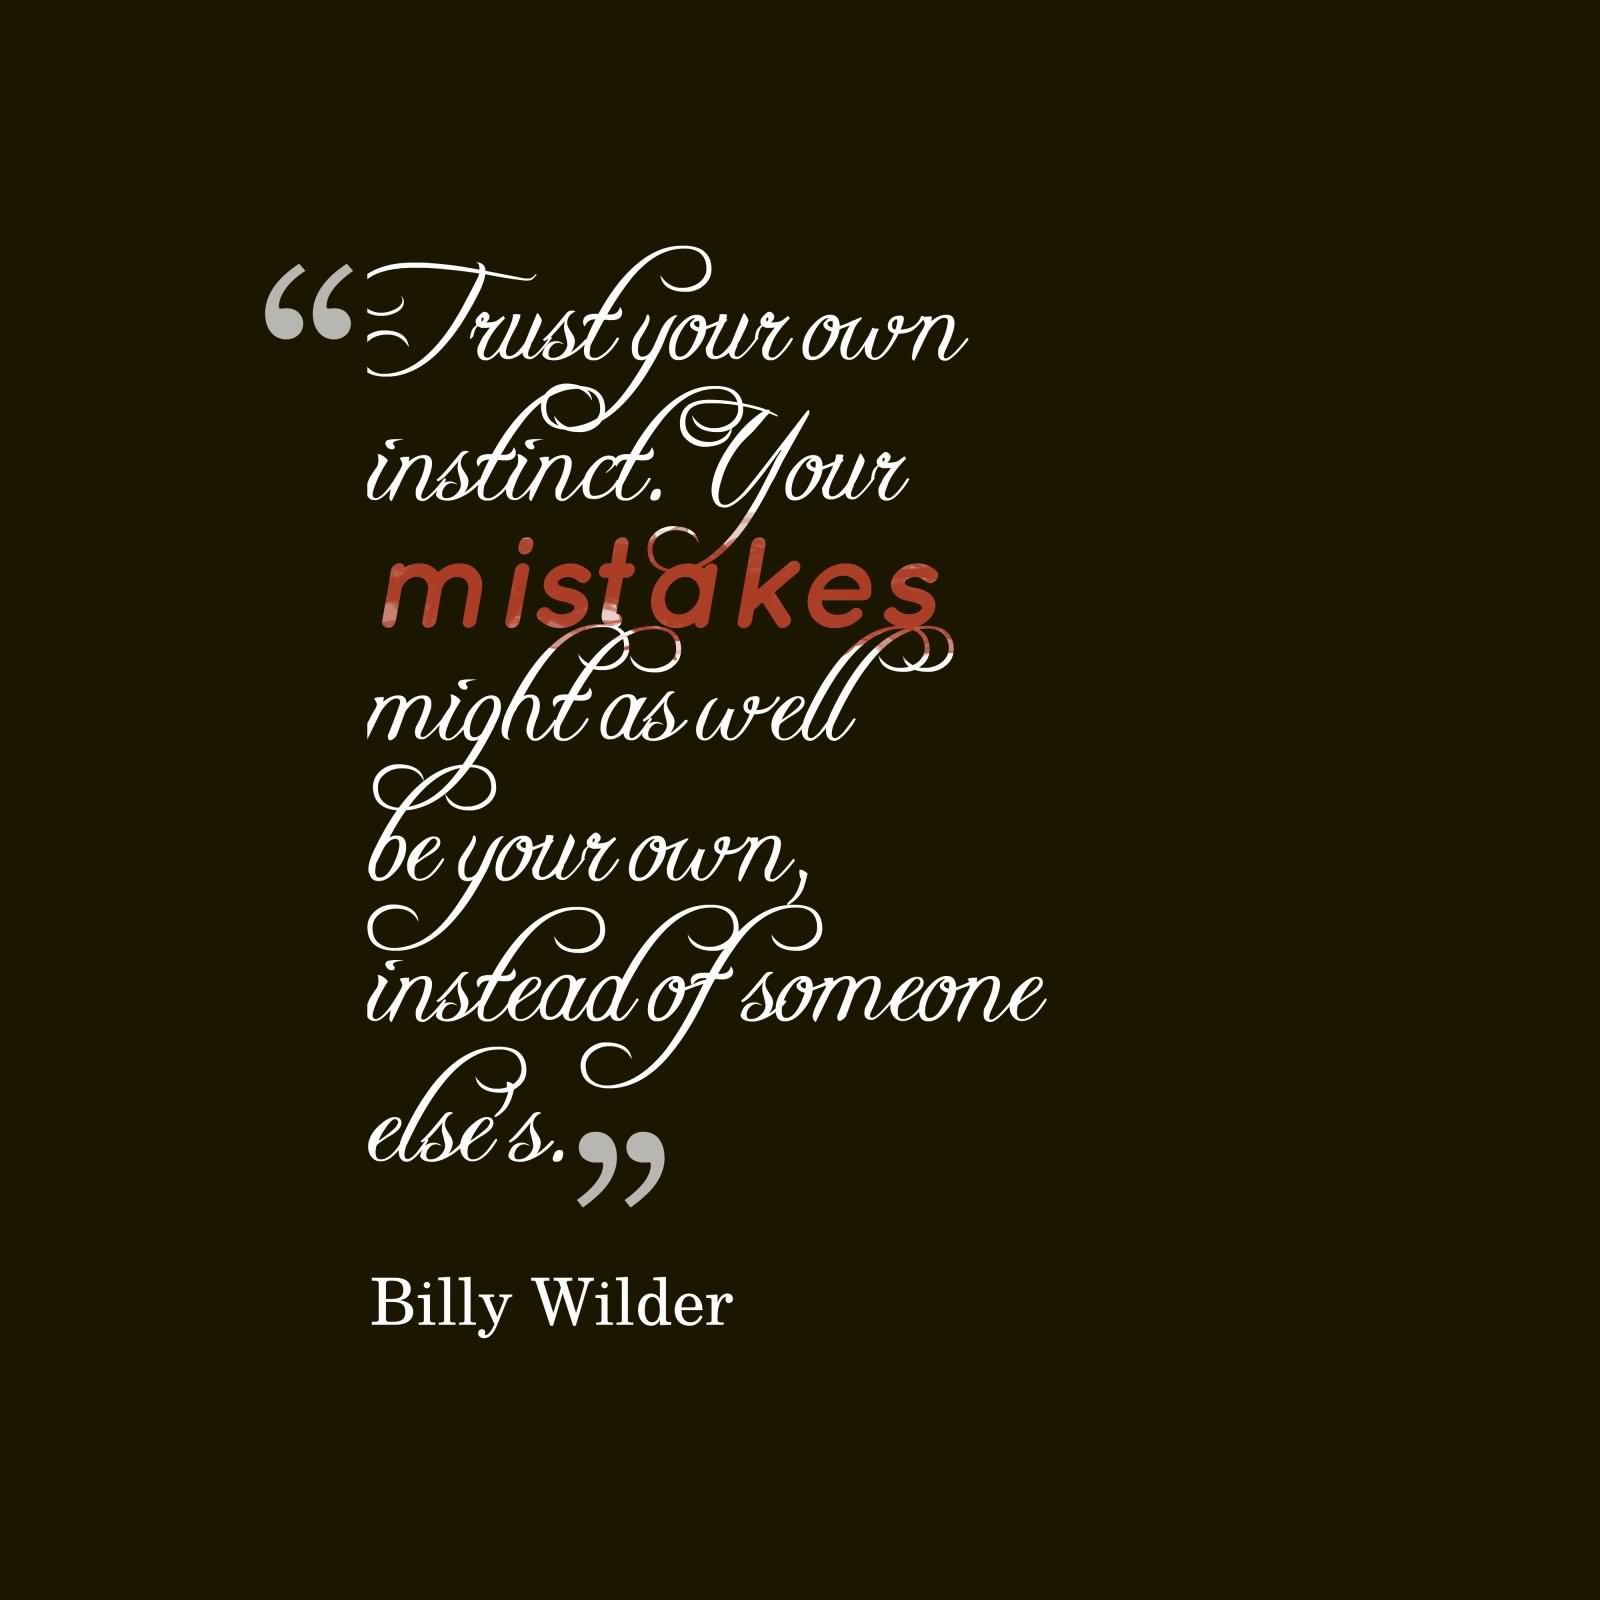 Trust your own instinct. Your mistakes might as well be your own instead of someone else's  - Billy Wilder